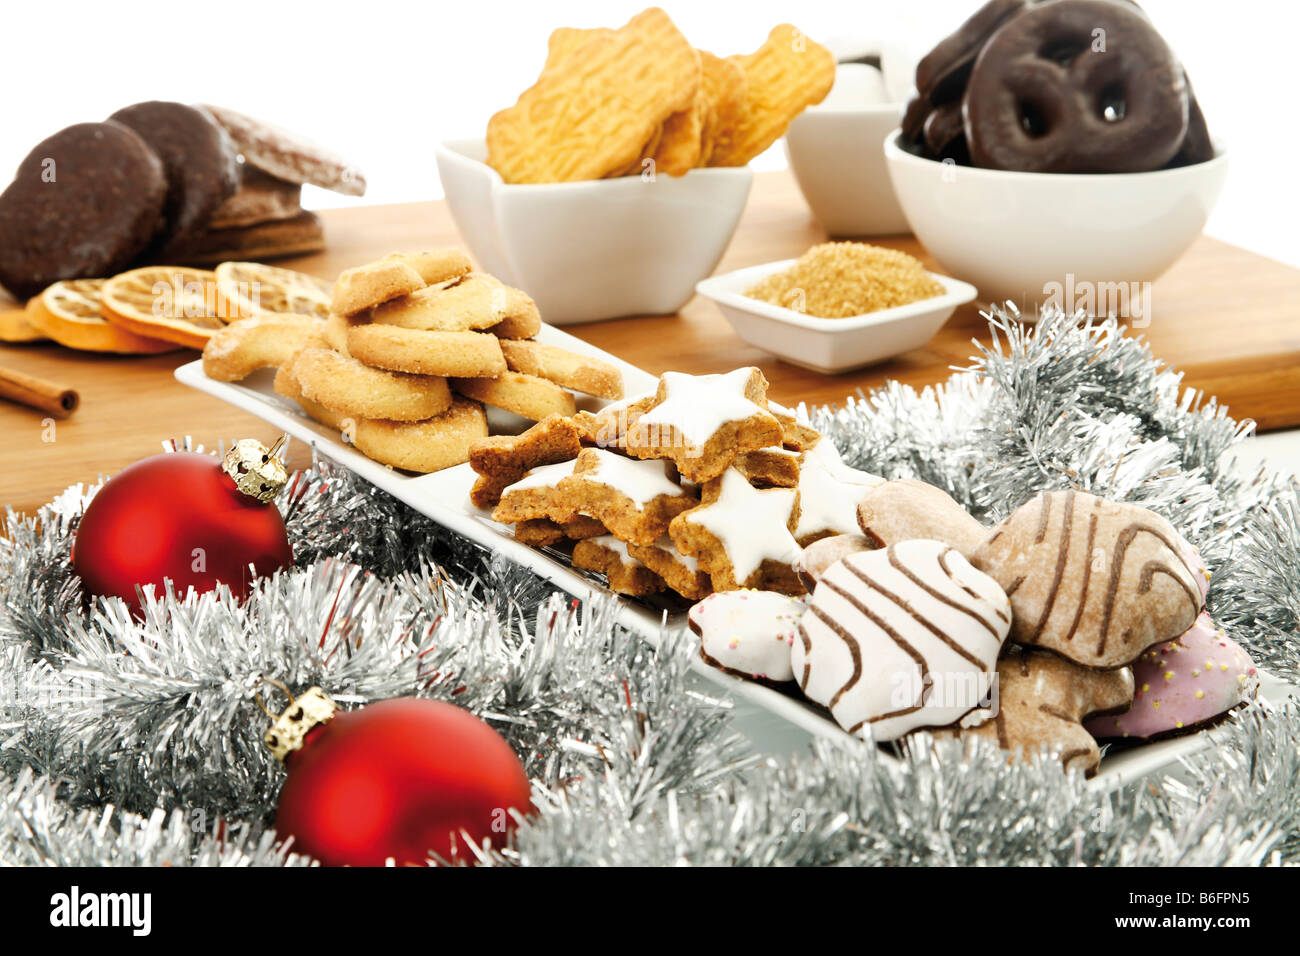 Assortment of christmas biscuits, cinnamon star-shaped biscuits, gingerbread, vanilla biscuits, chocolate gingerbread, spiced b Stock Photo